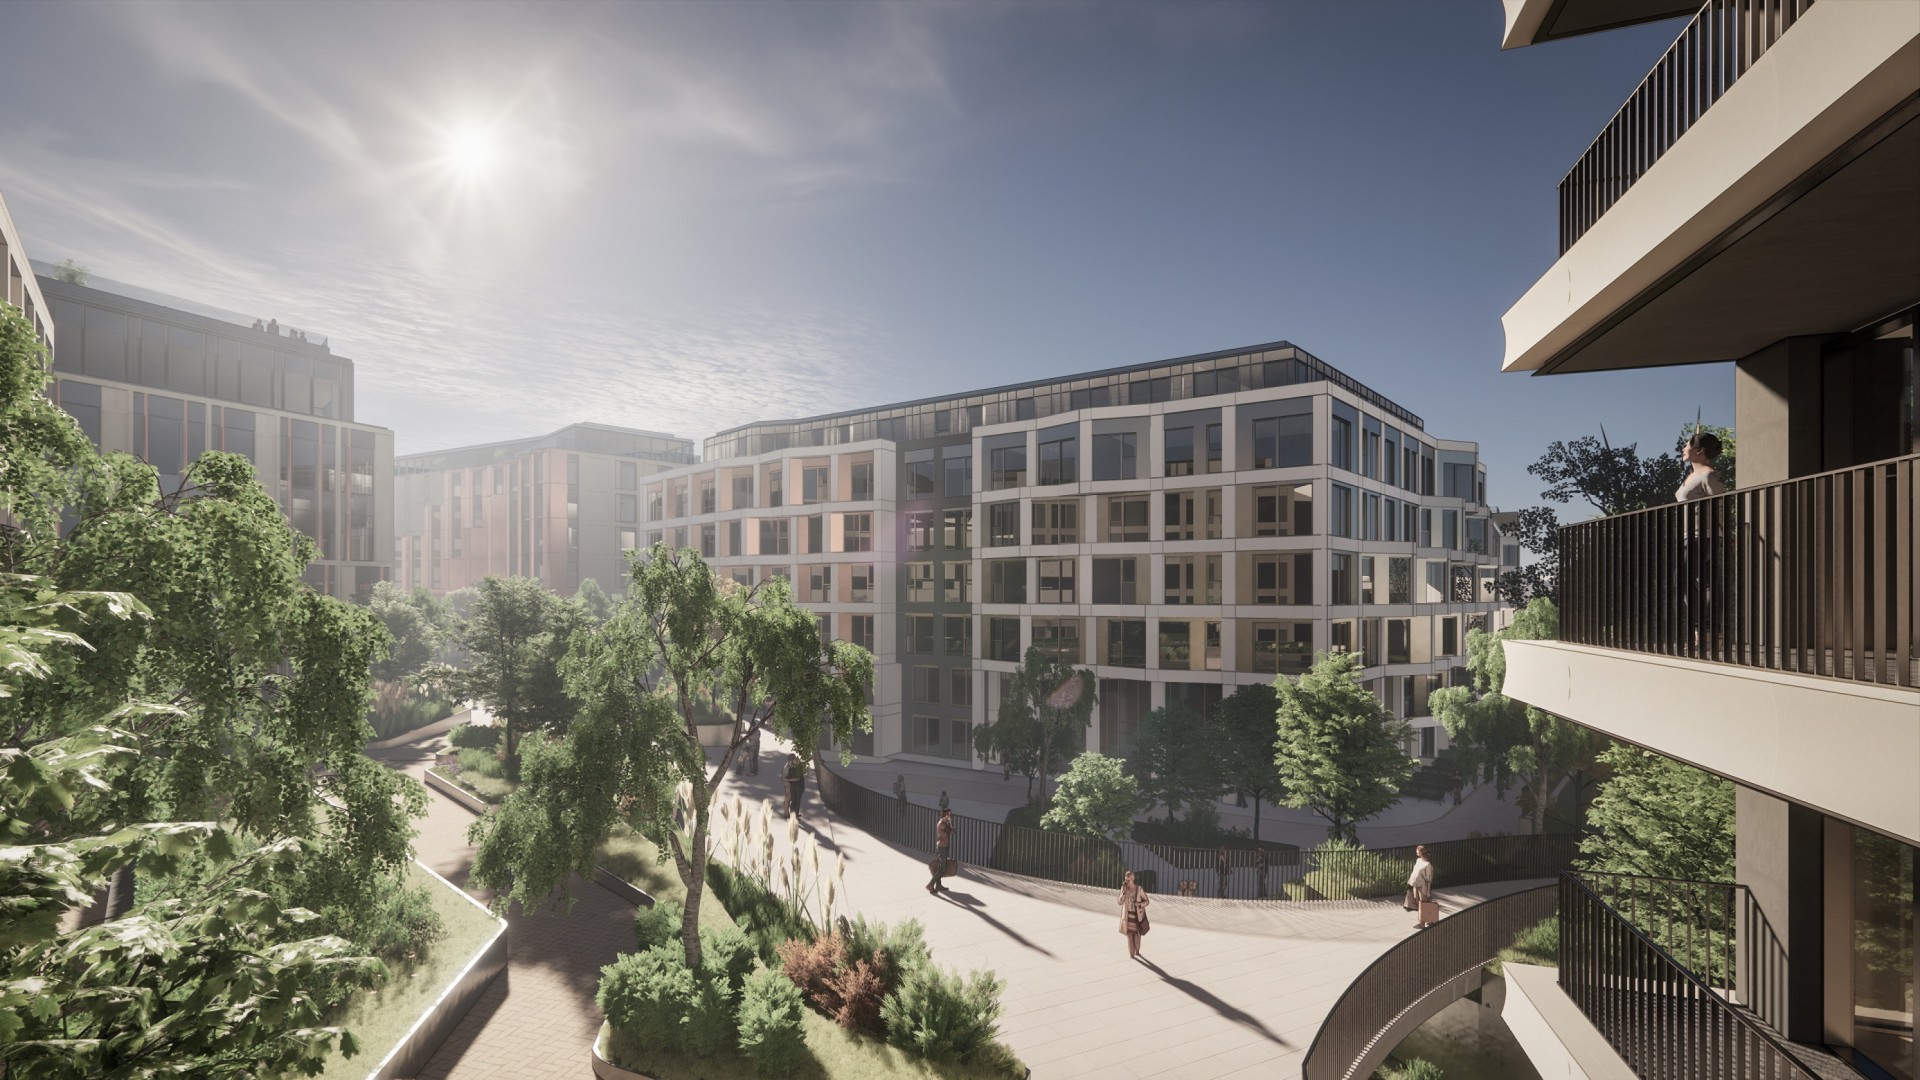 New Town Quarter redevelopment project set for approval